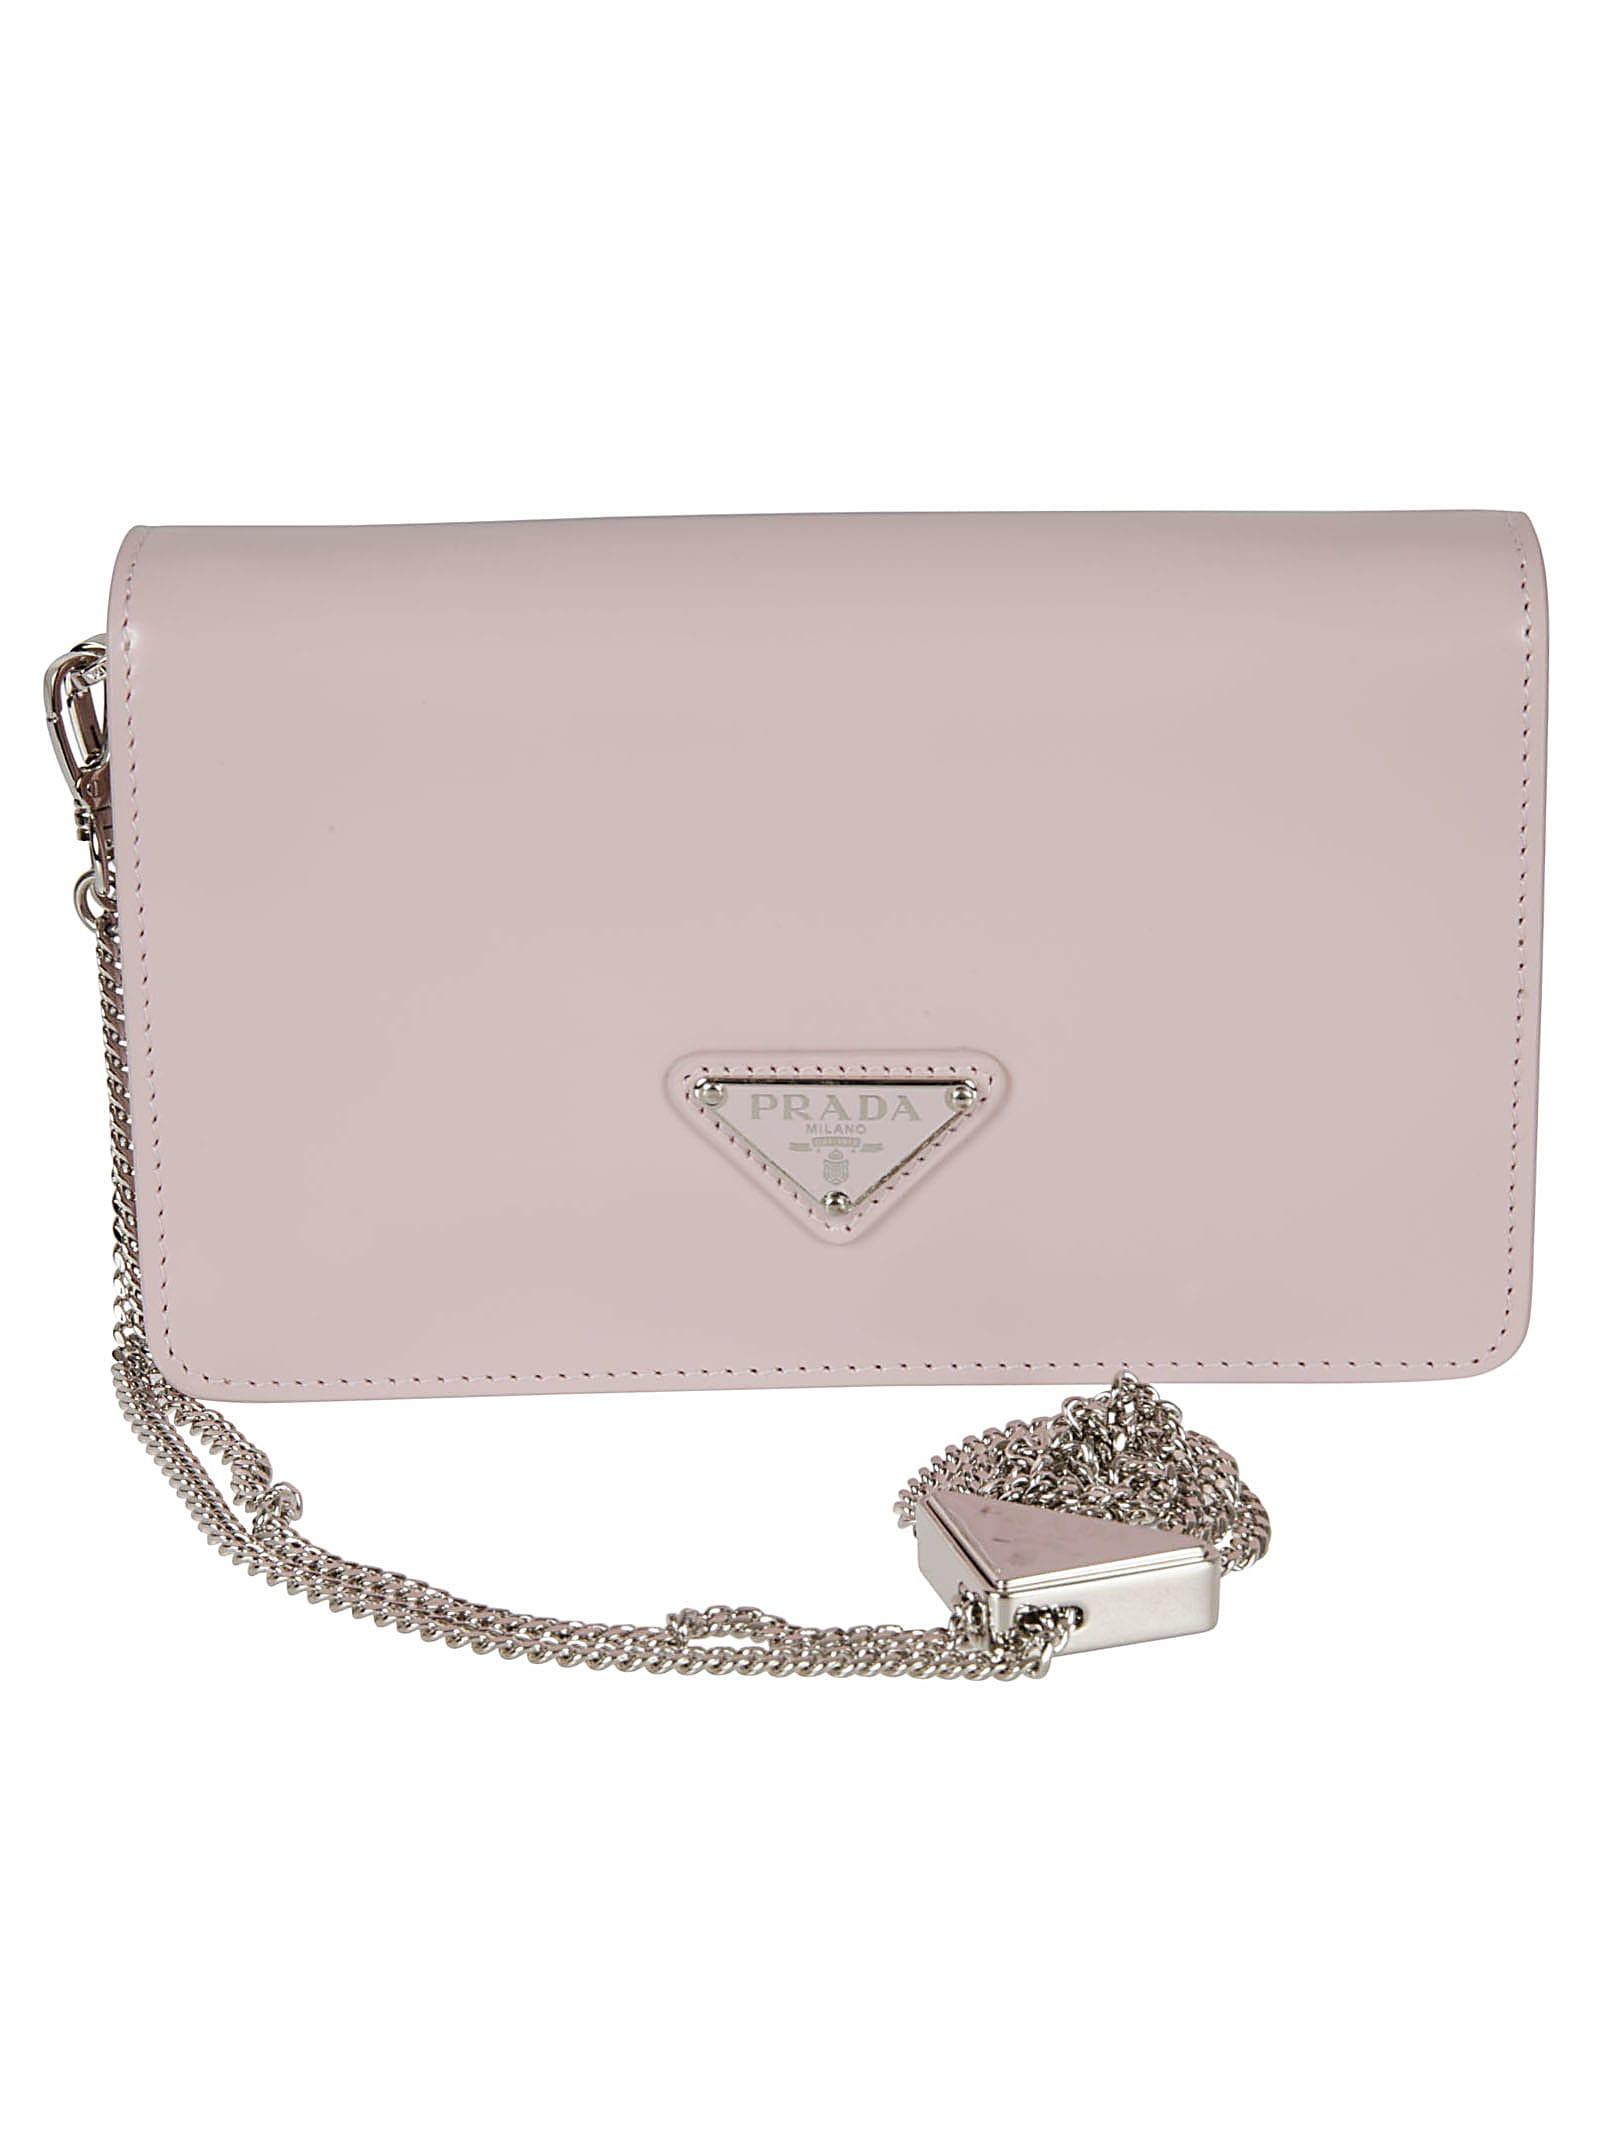 Prada Light Pink Saffiano Leather Wallet On Chain